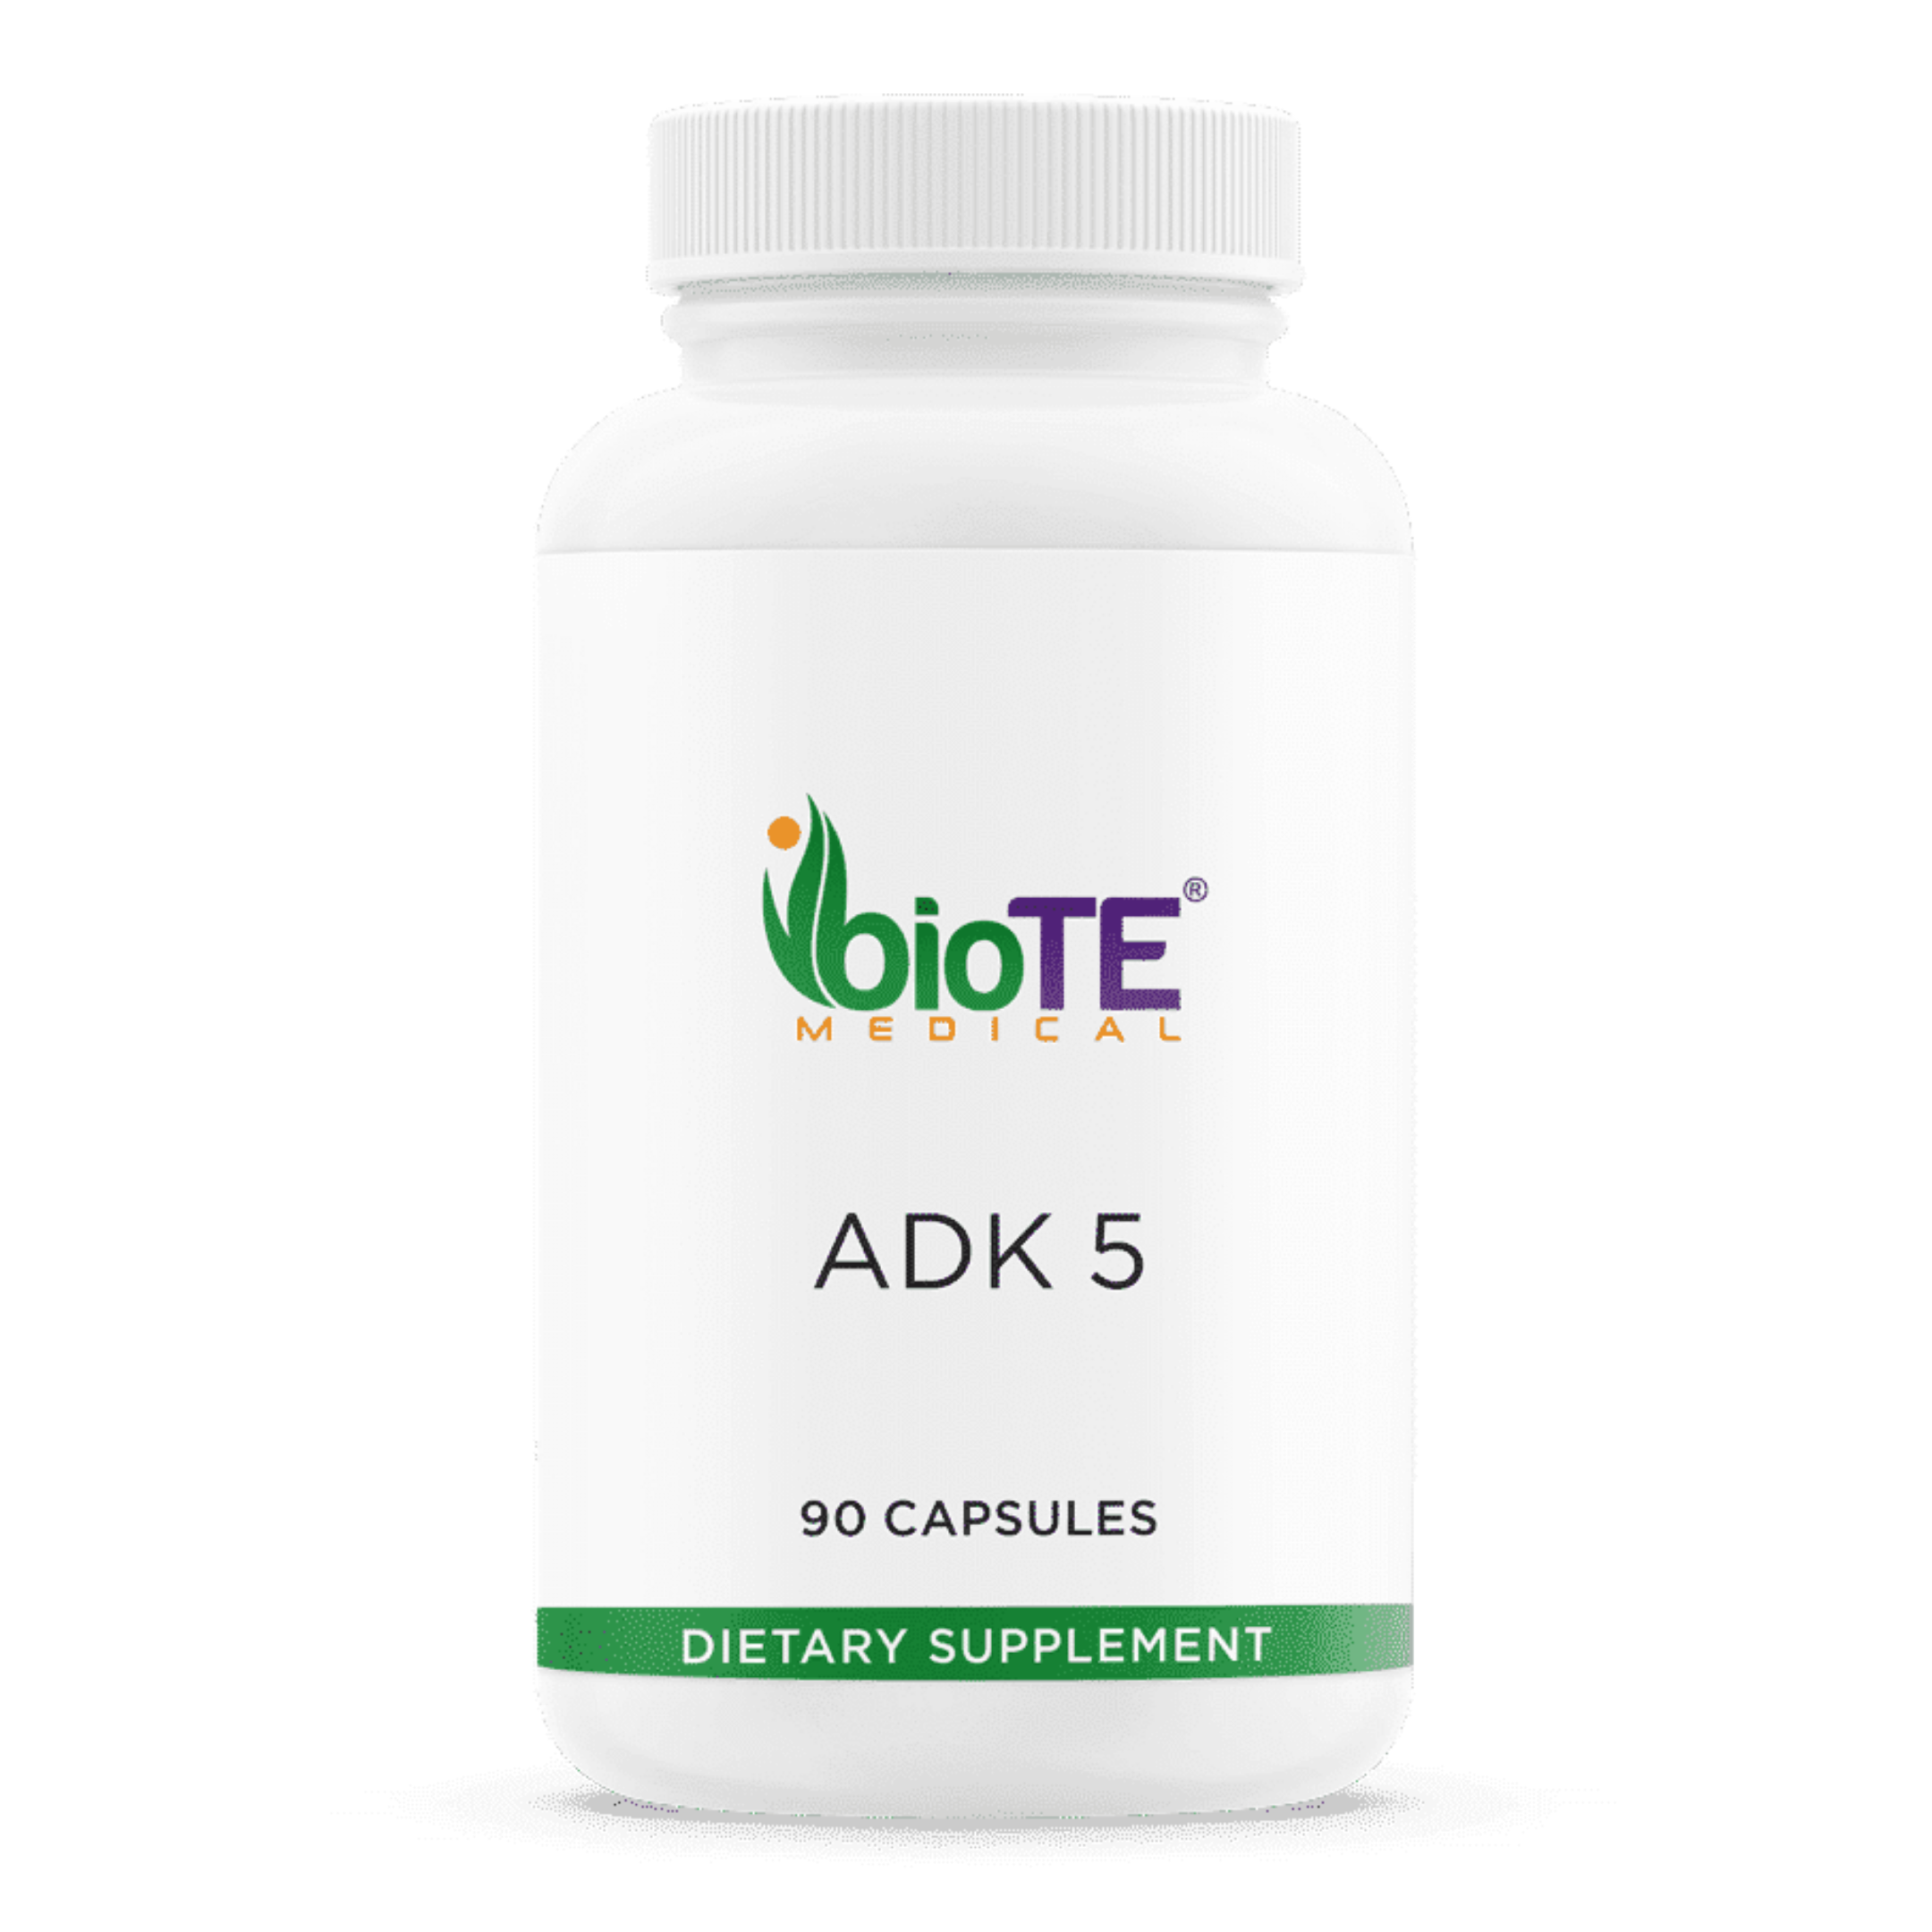  • Vitamin A is required for development and growth of bones| • Vitamin D3 is essential for calcium metabolism • 7/10 Americans are deficient • Maintains muscles &amp; bones • Supports immune system, nails, &amp; thyroid function • Vitamin K2 builds 